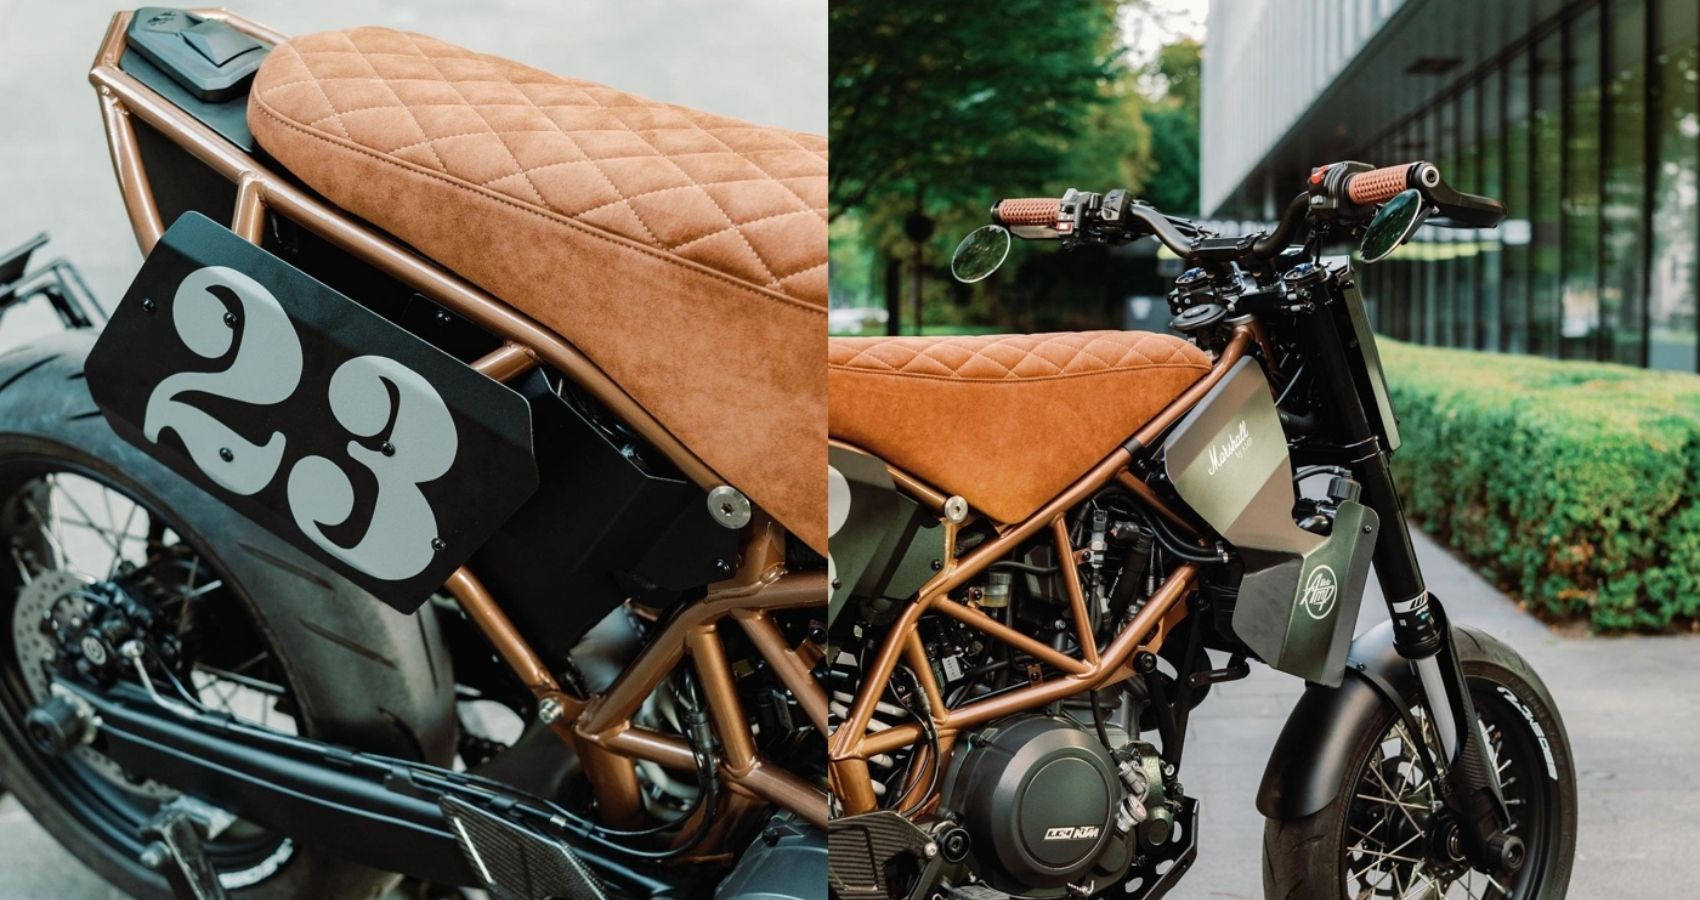 Side panels of the customized KTM 690 SMC-R by AMP Motorcycles